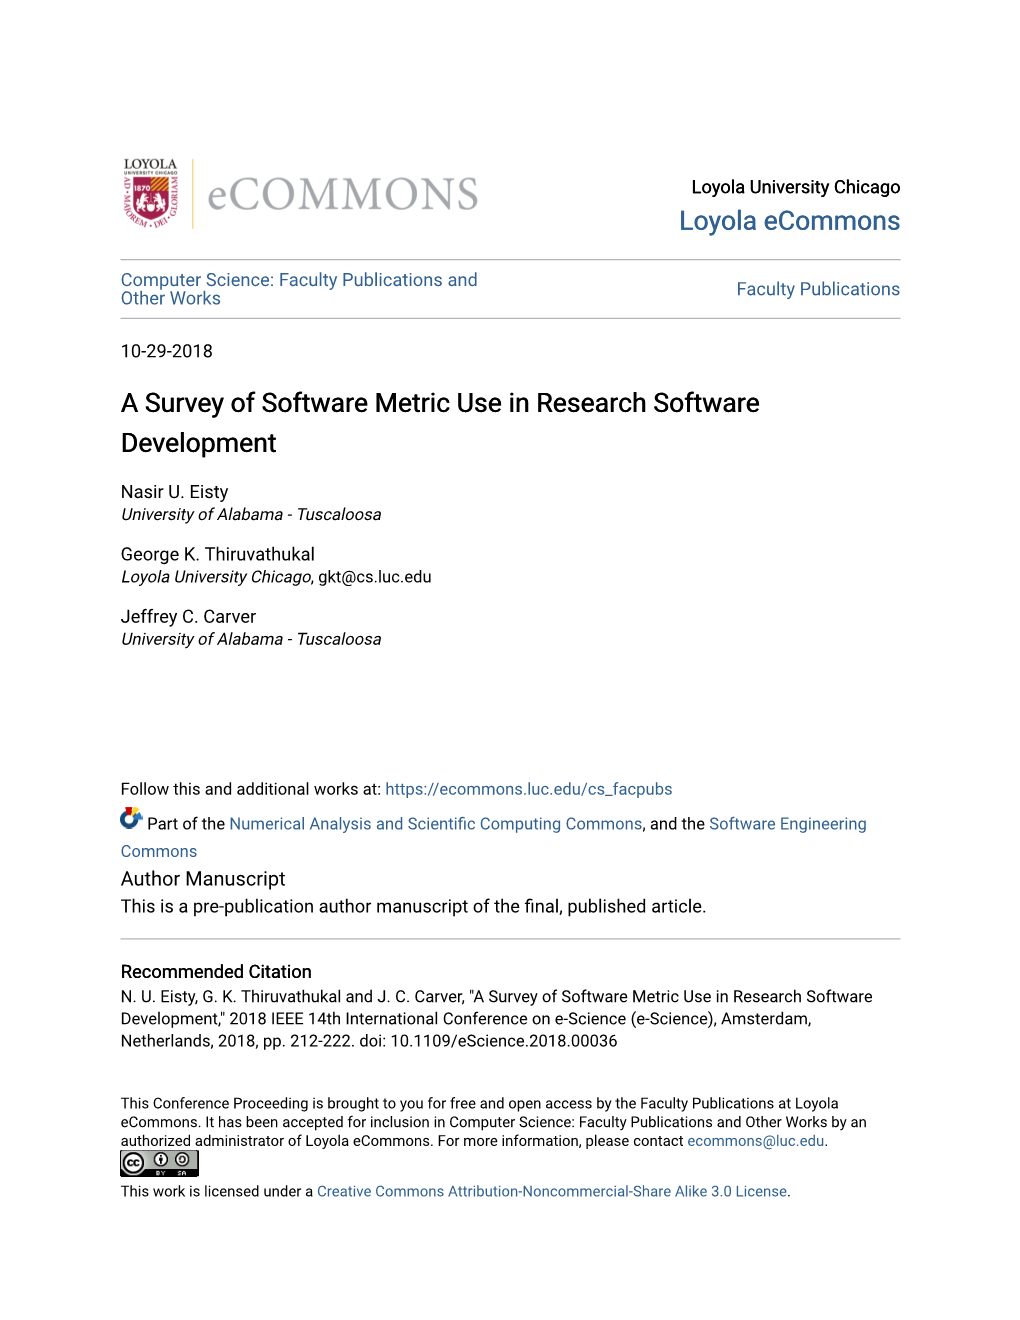 A Survey of Software Metric Use in Research Software Development